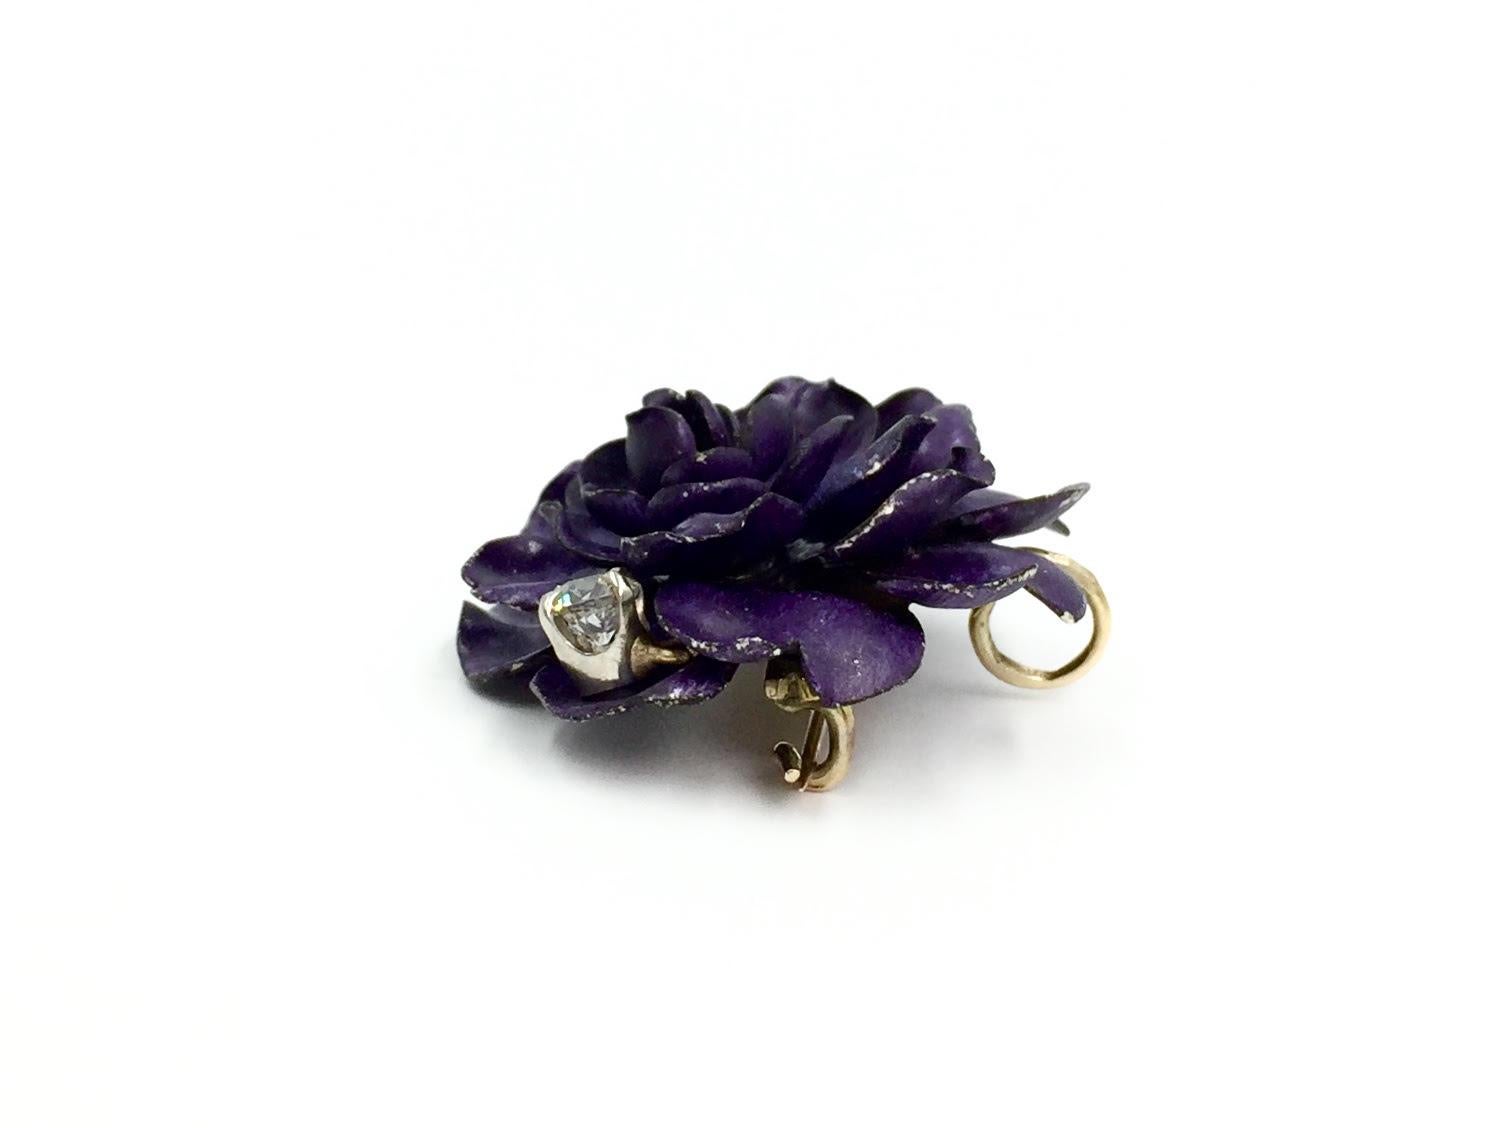 Made of layers of violet enamel petals and 14k yellow gold, this romantic vintage brooch can also be worn as a pendant. Purple flower features one dangling prong set old mine cut diamond, weighing approximately .30 carats. Diamond is approximately H